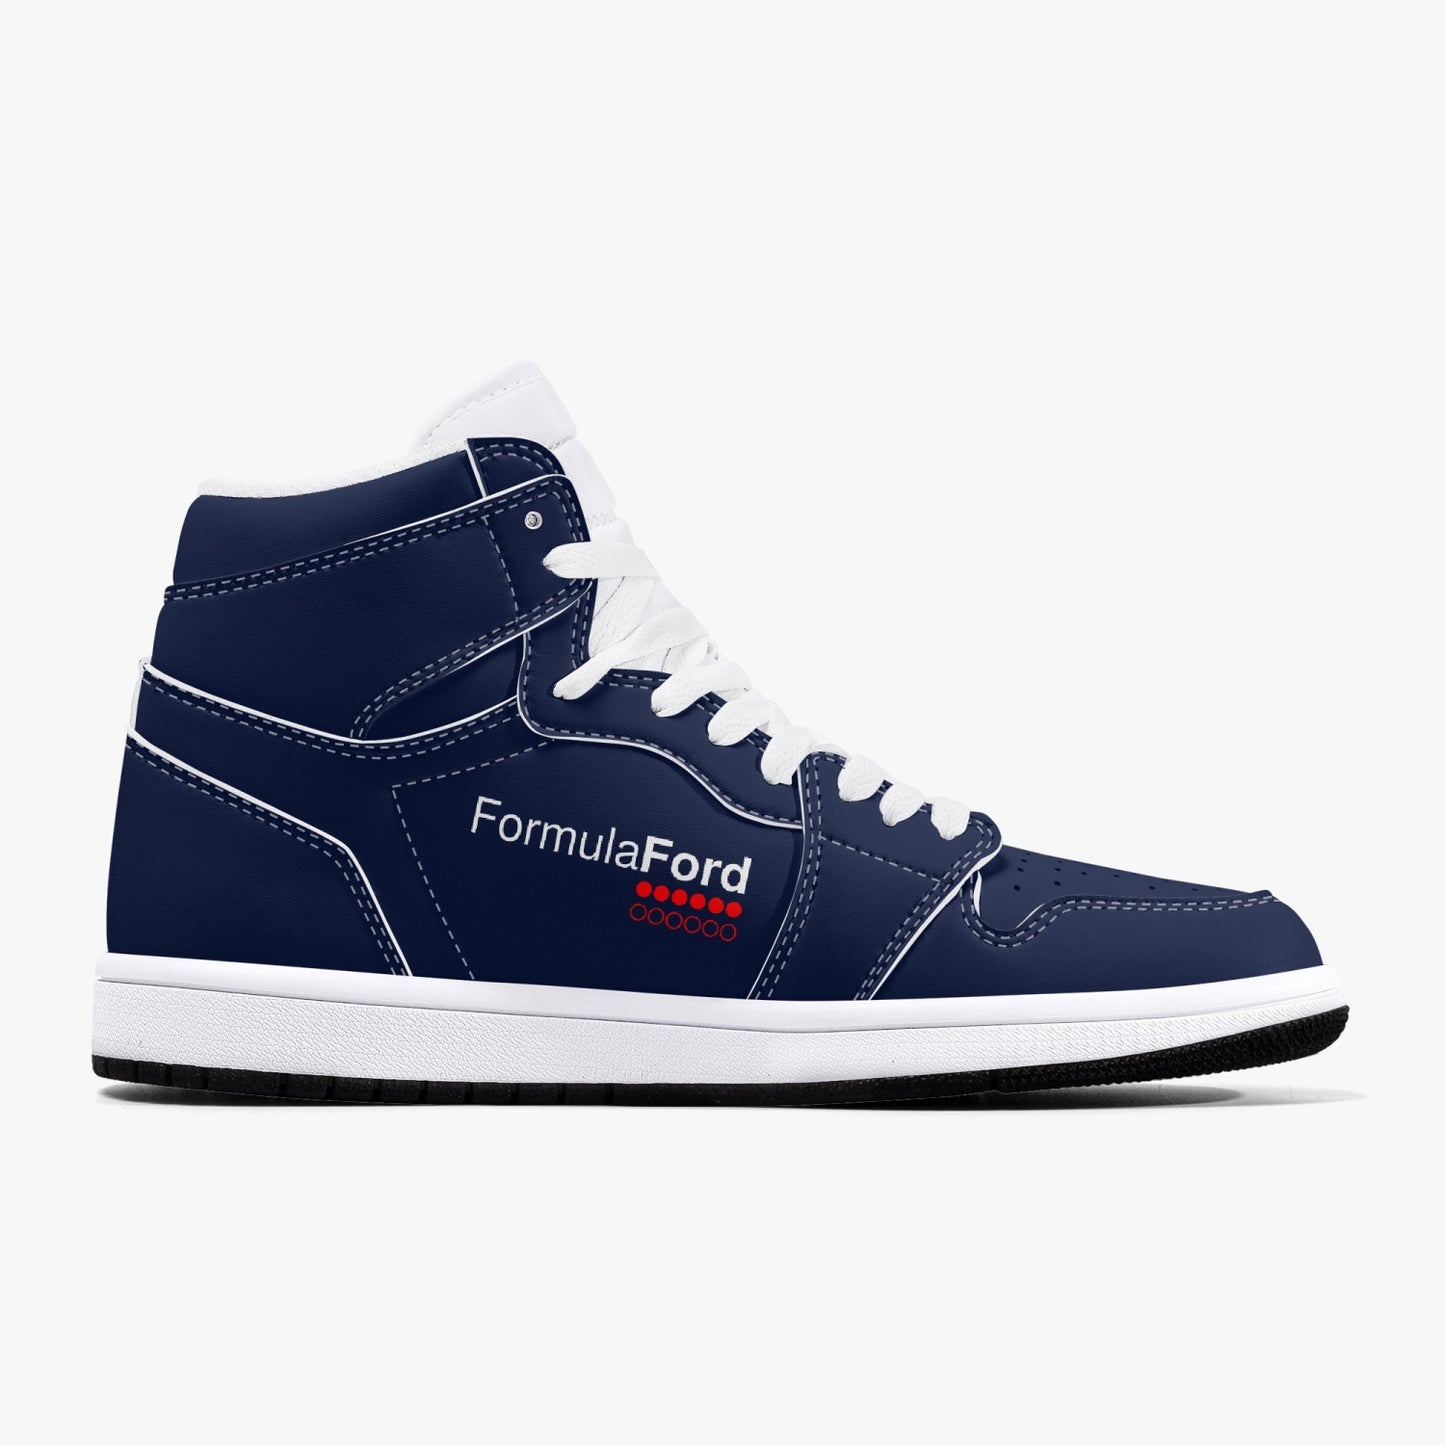 FORMULA FORD Official High-Top Leather Sneakers - Navy